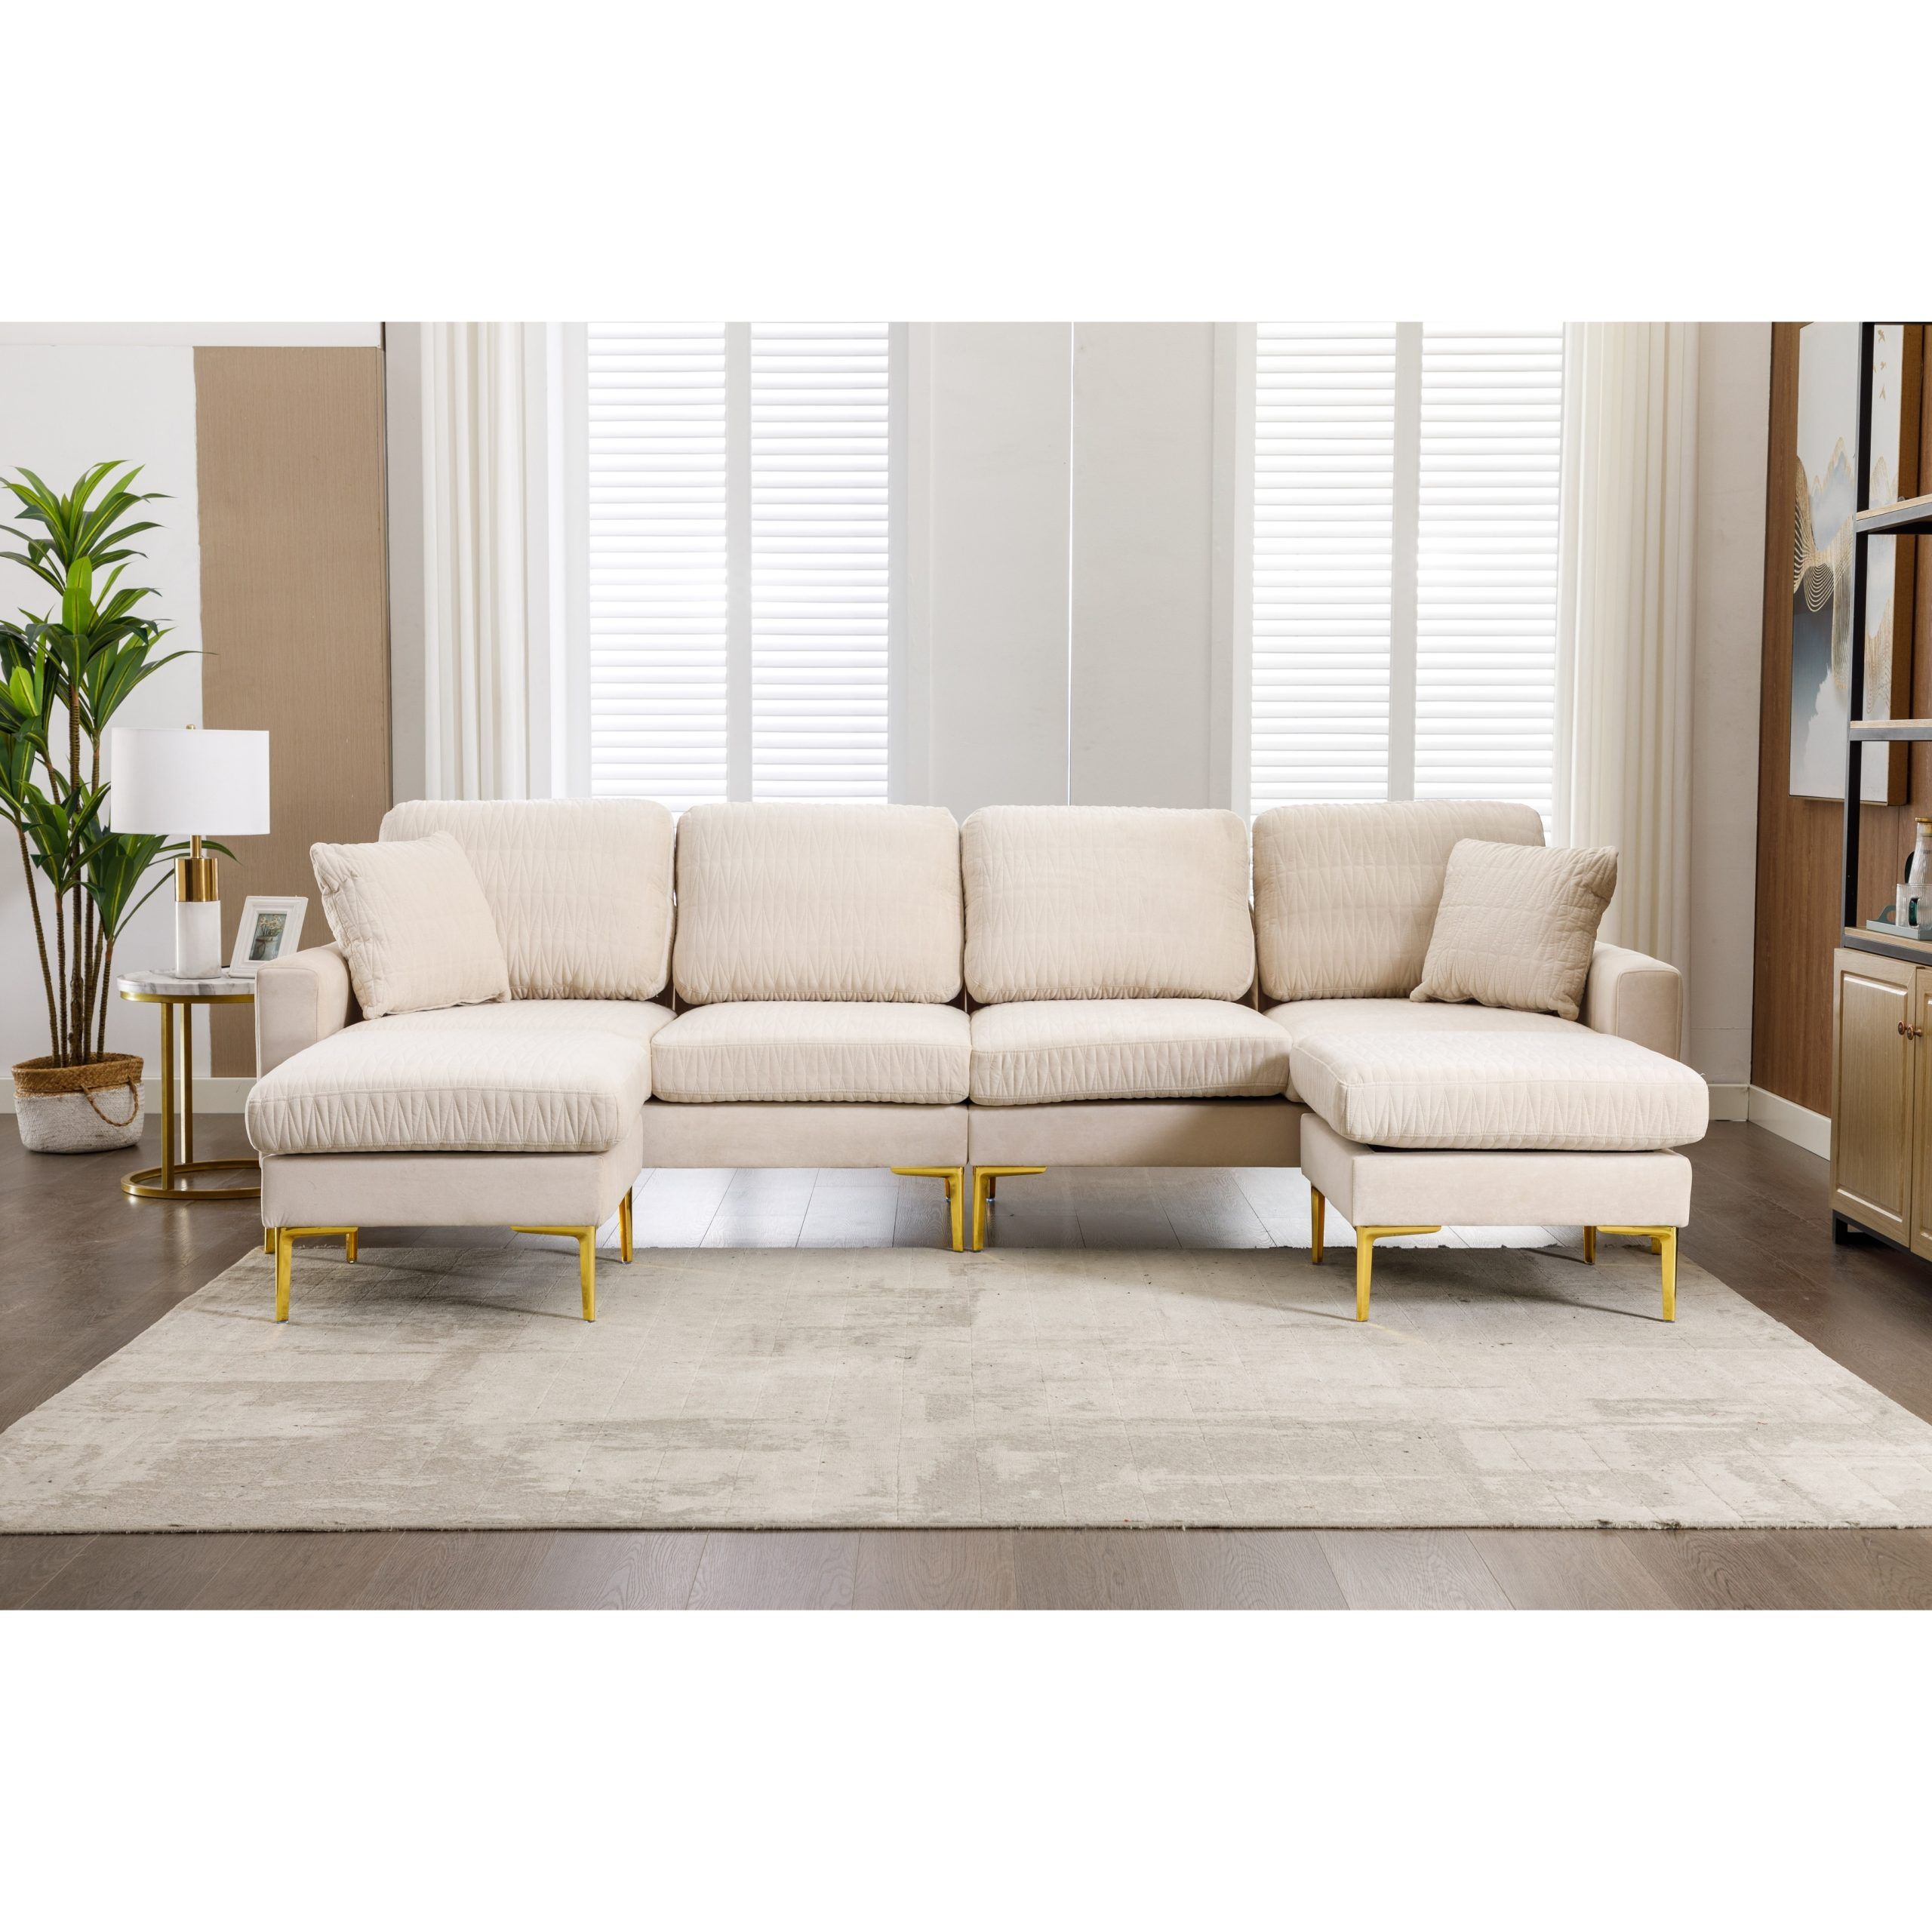 Velvet Modular Sectional Sofa Set For Living Room, Sponge Filled Reversible  Couch With Movable Ottomans And Golden Legs, Beige – Bed Bath & Beyond –  39034670 In Cream Velvet Modular Sectionals (View 14 of 15)